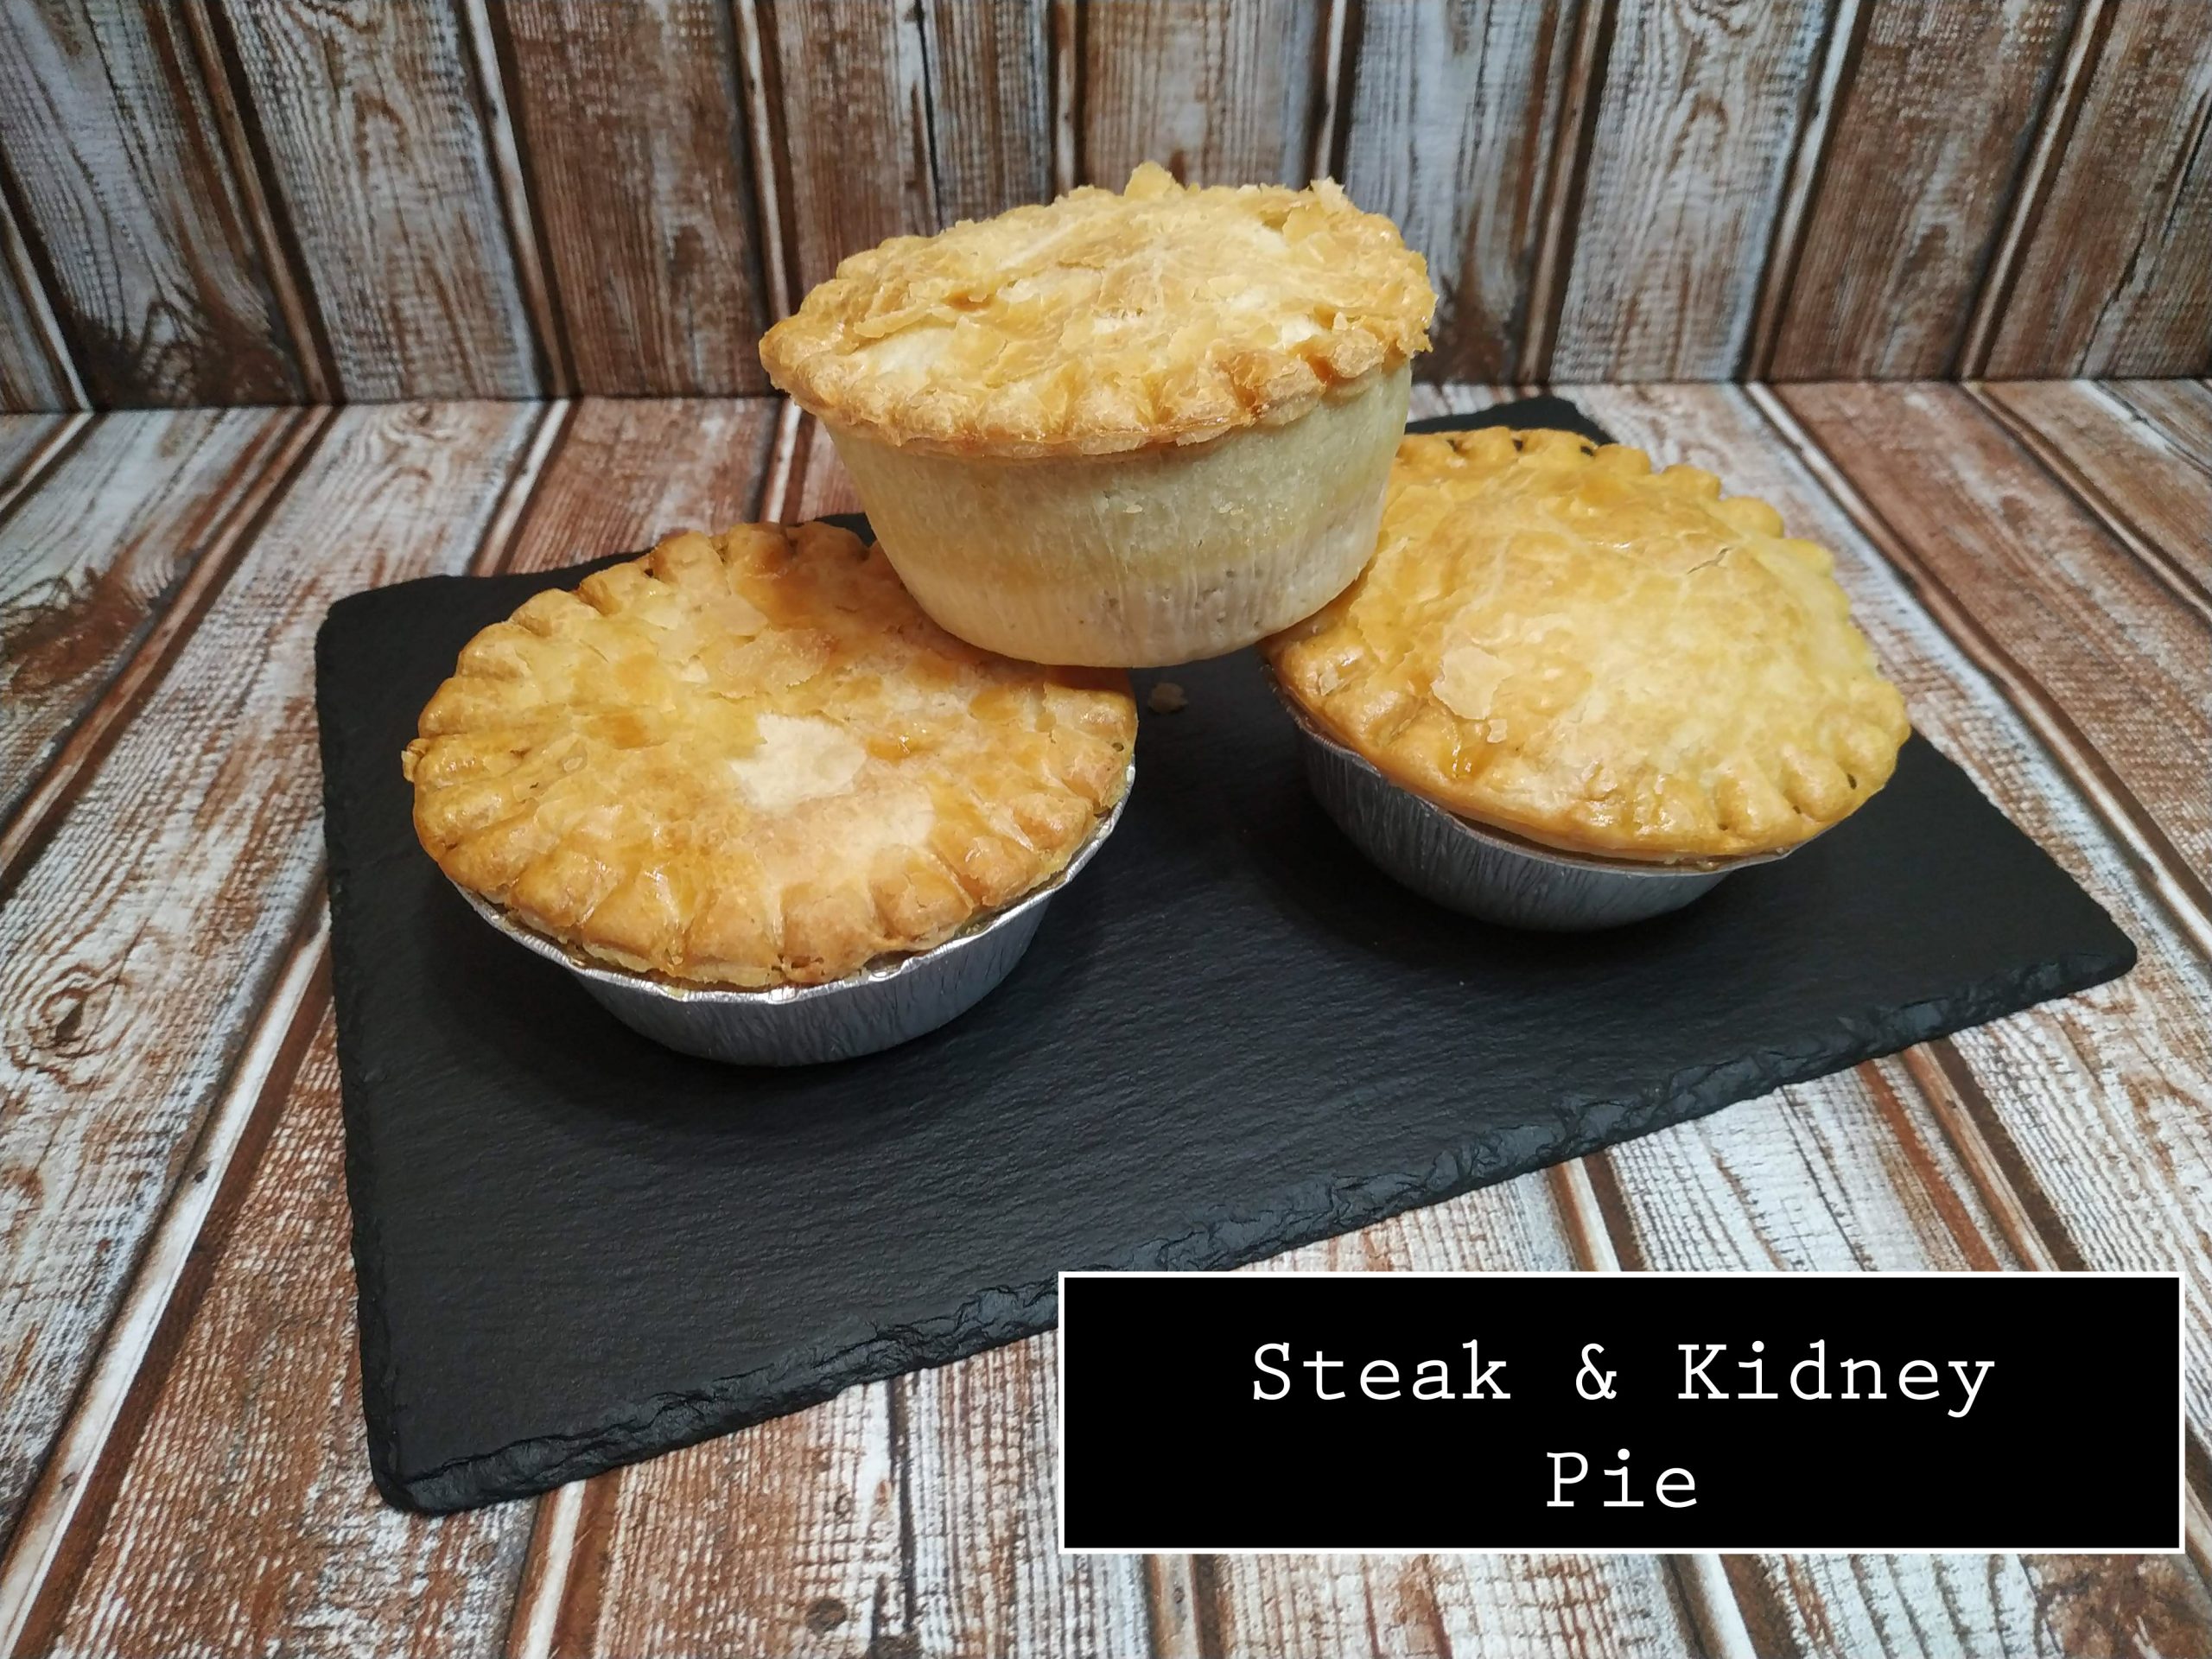 Steak & Kidney Pies by Sandwich in the Square